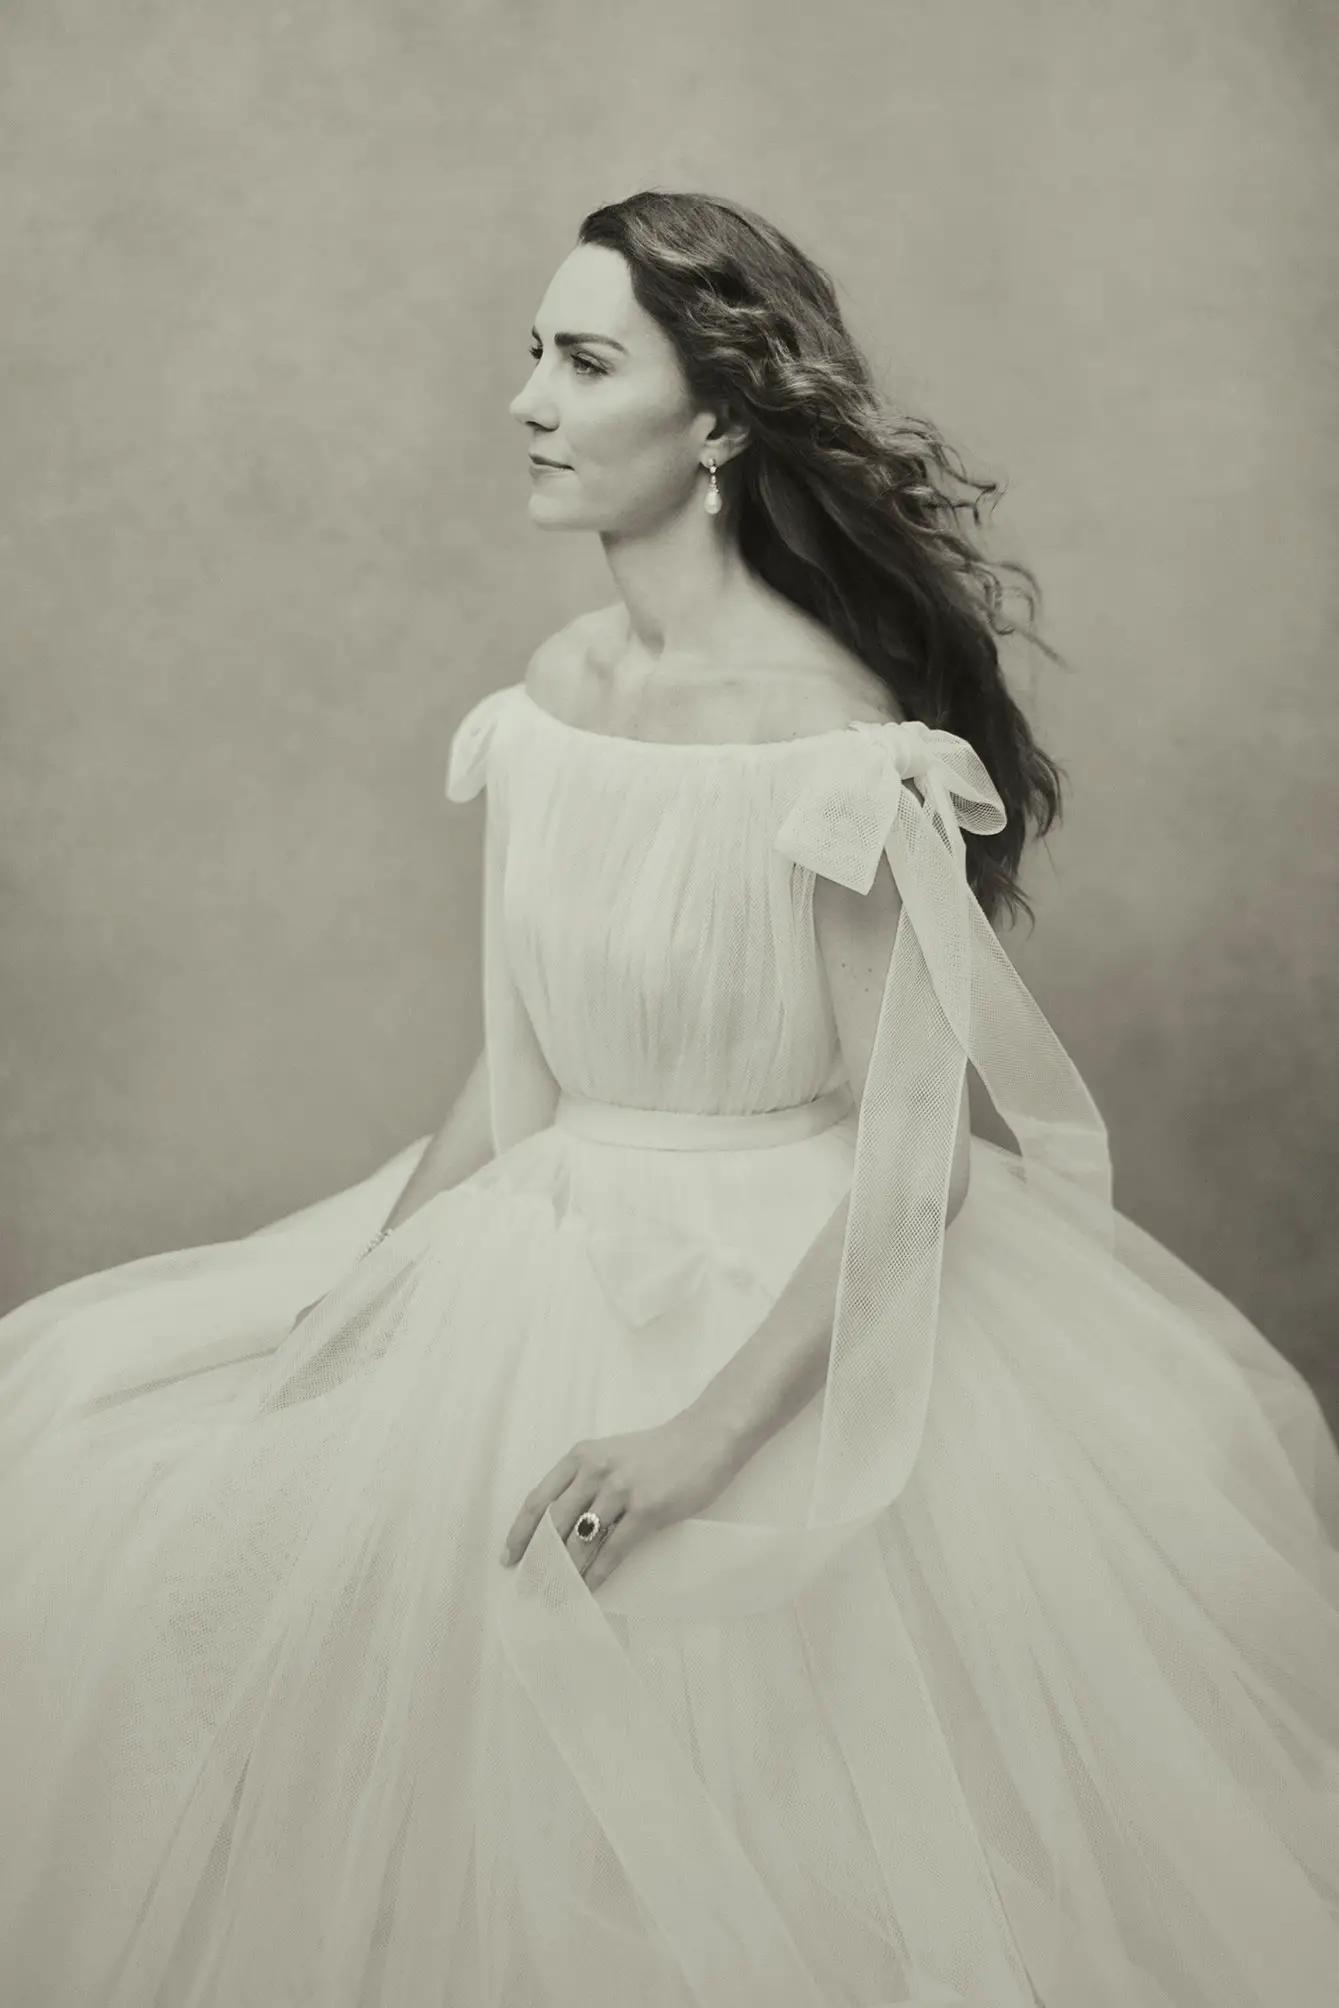 The Princess of Wales wore a white Alexander McQueen gown with Princess Diana's Collingwood and Pearl Diamond Earrings for her 40th birthday portrait